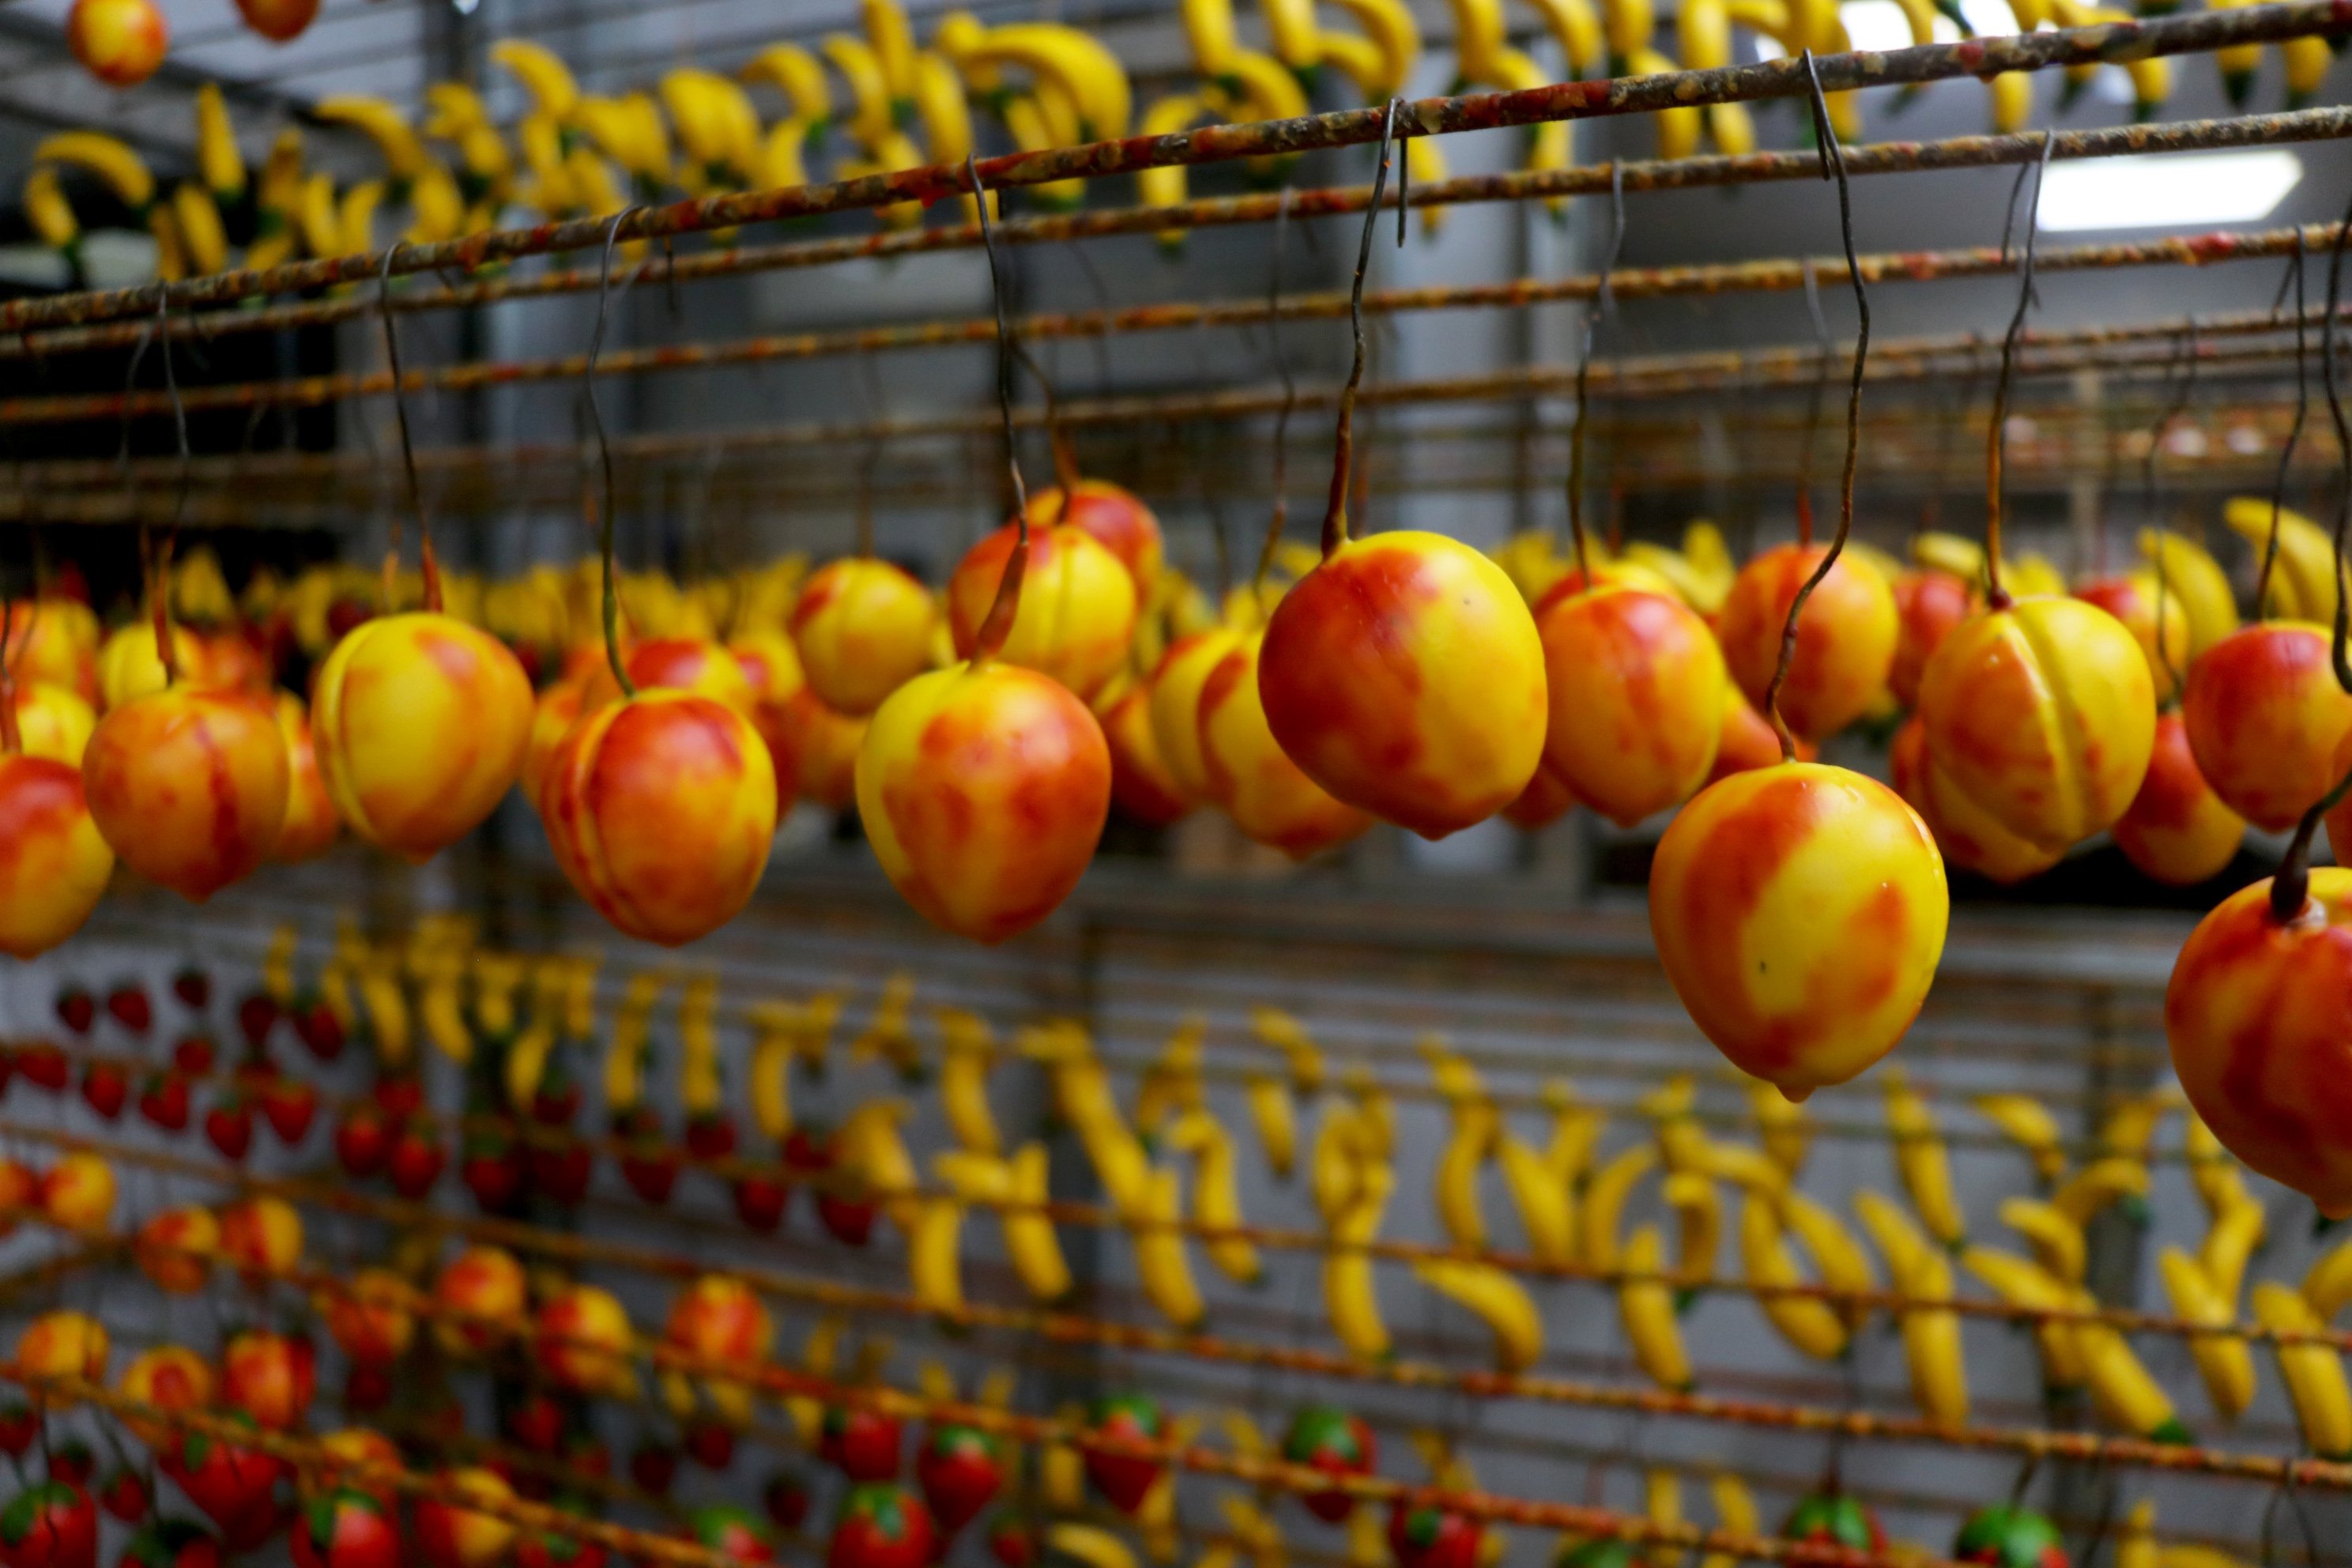 Some fruit-scented soaps shaped like peaches are strung in the EDMIS facility in Edirne, northwestern Turkey, Jan. 6, 2021. (DHA Photo)